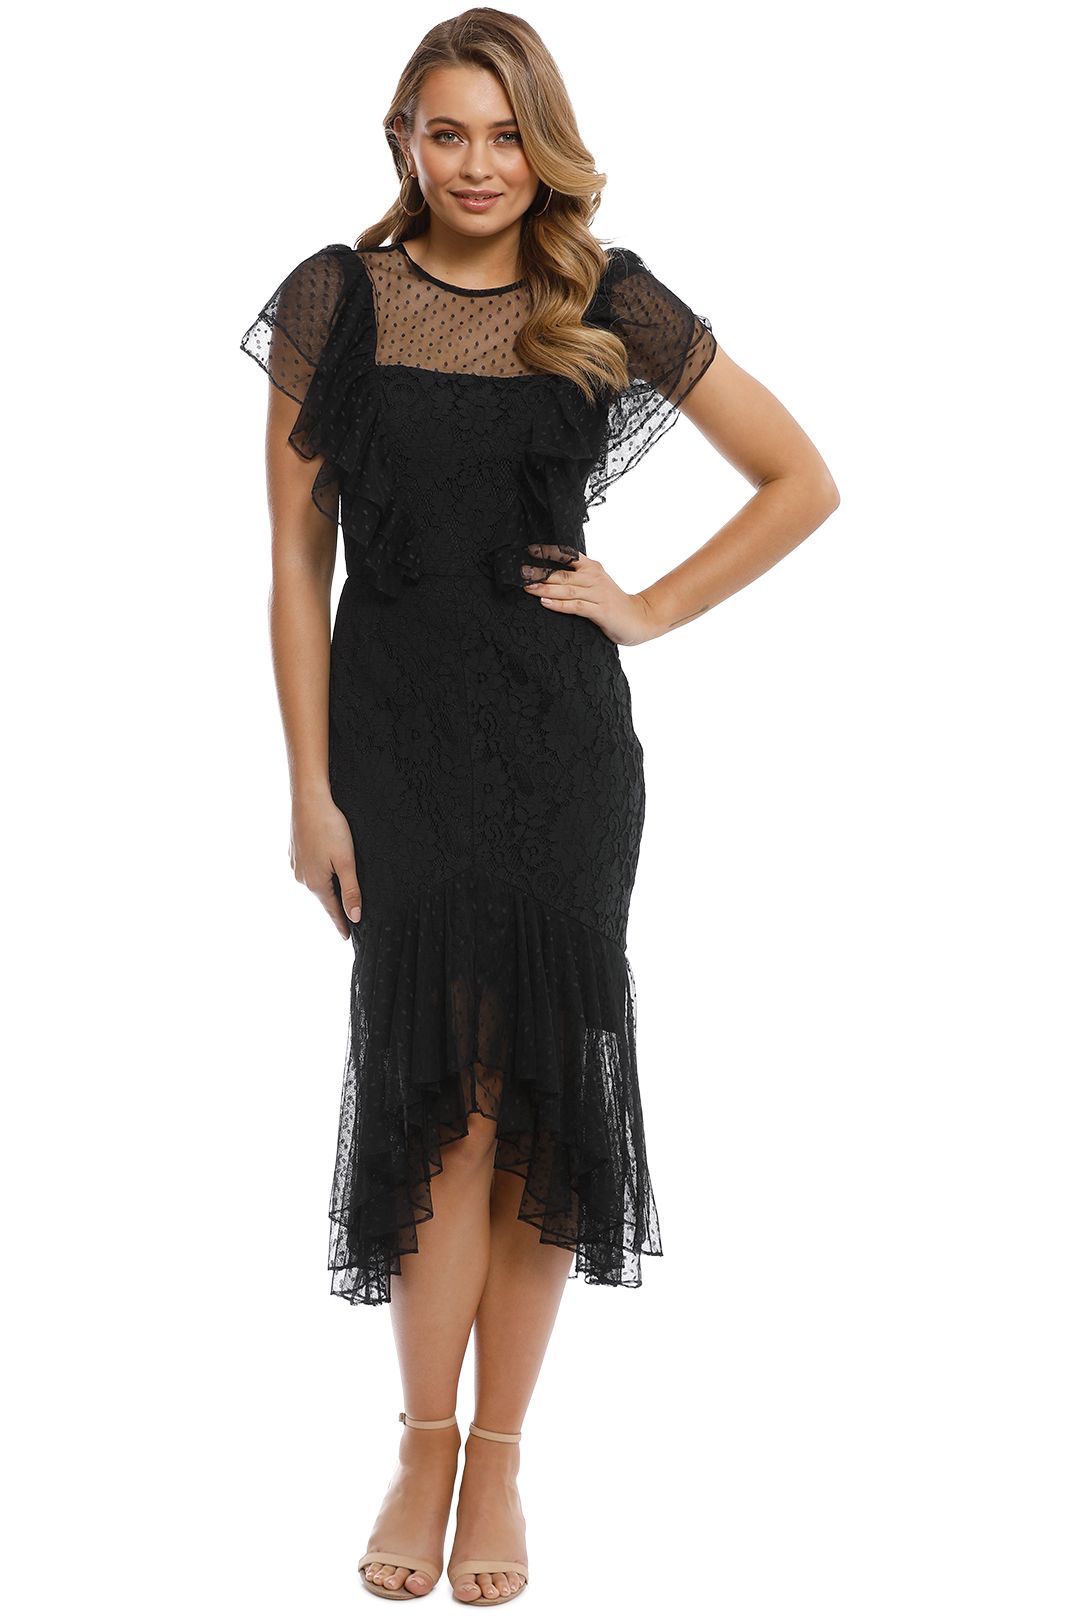 Cooper St - Rosie Lace Ruffle Dress - Black - Front